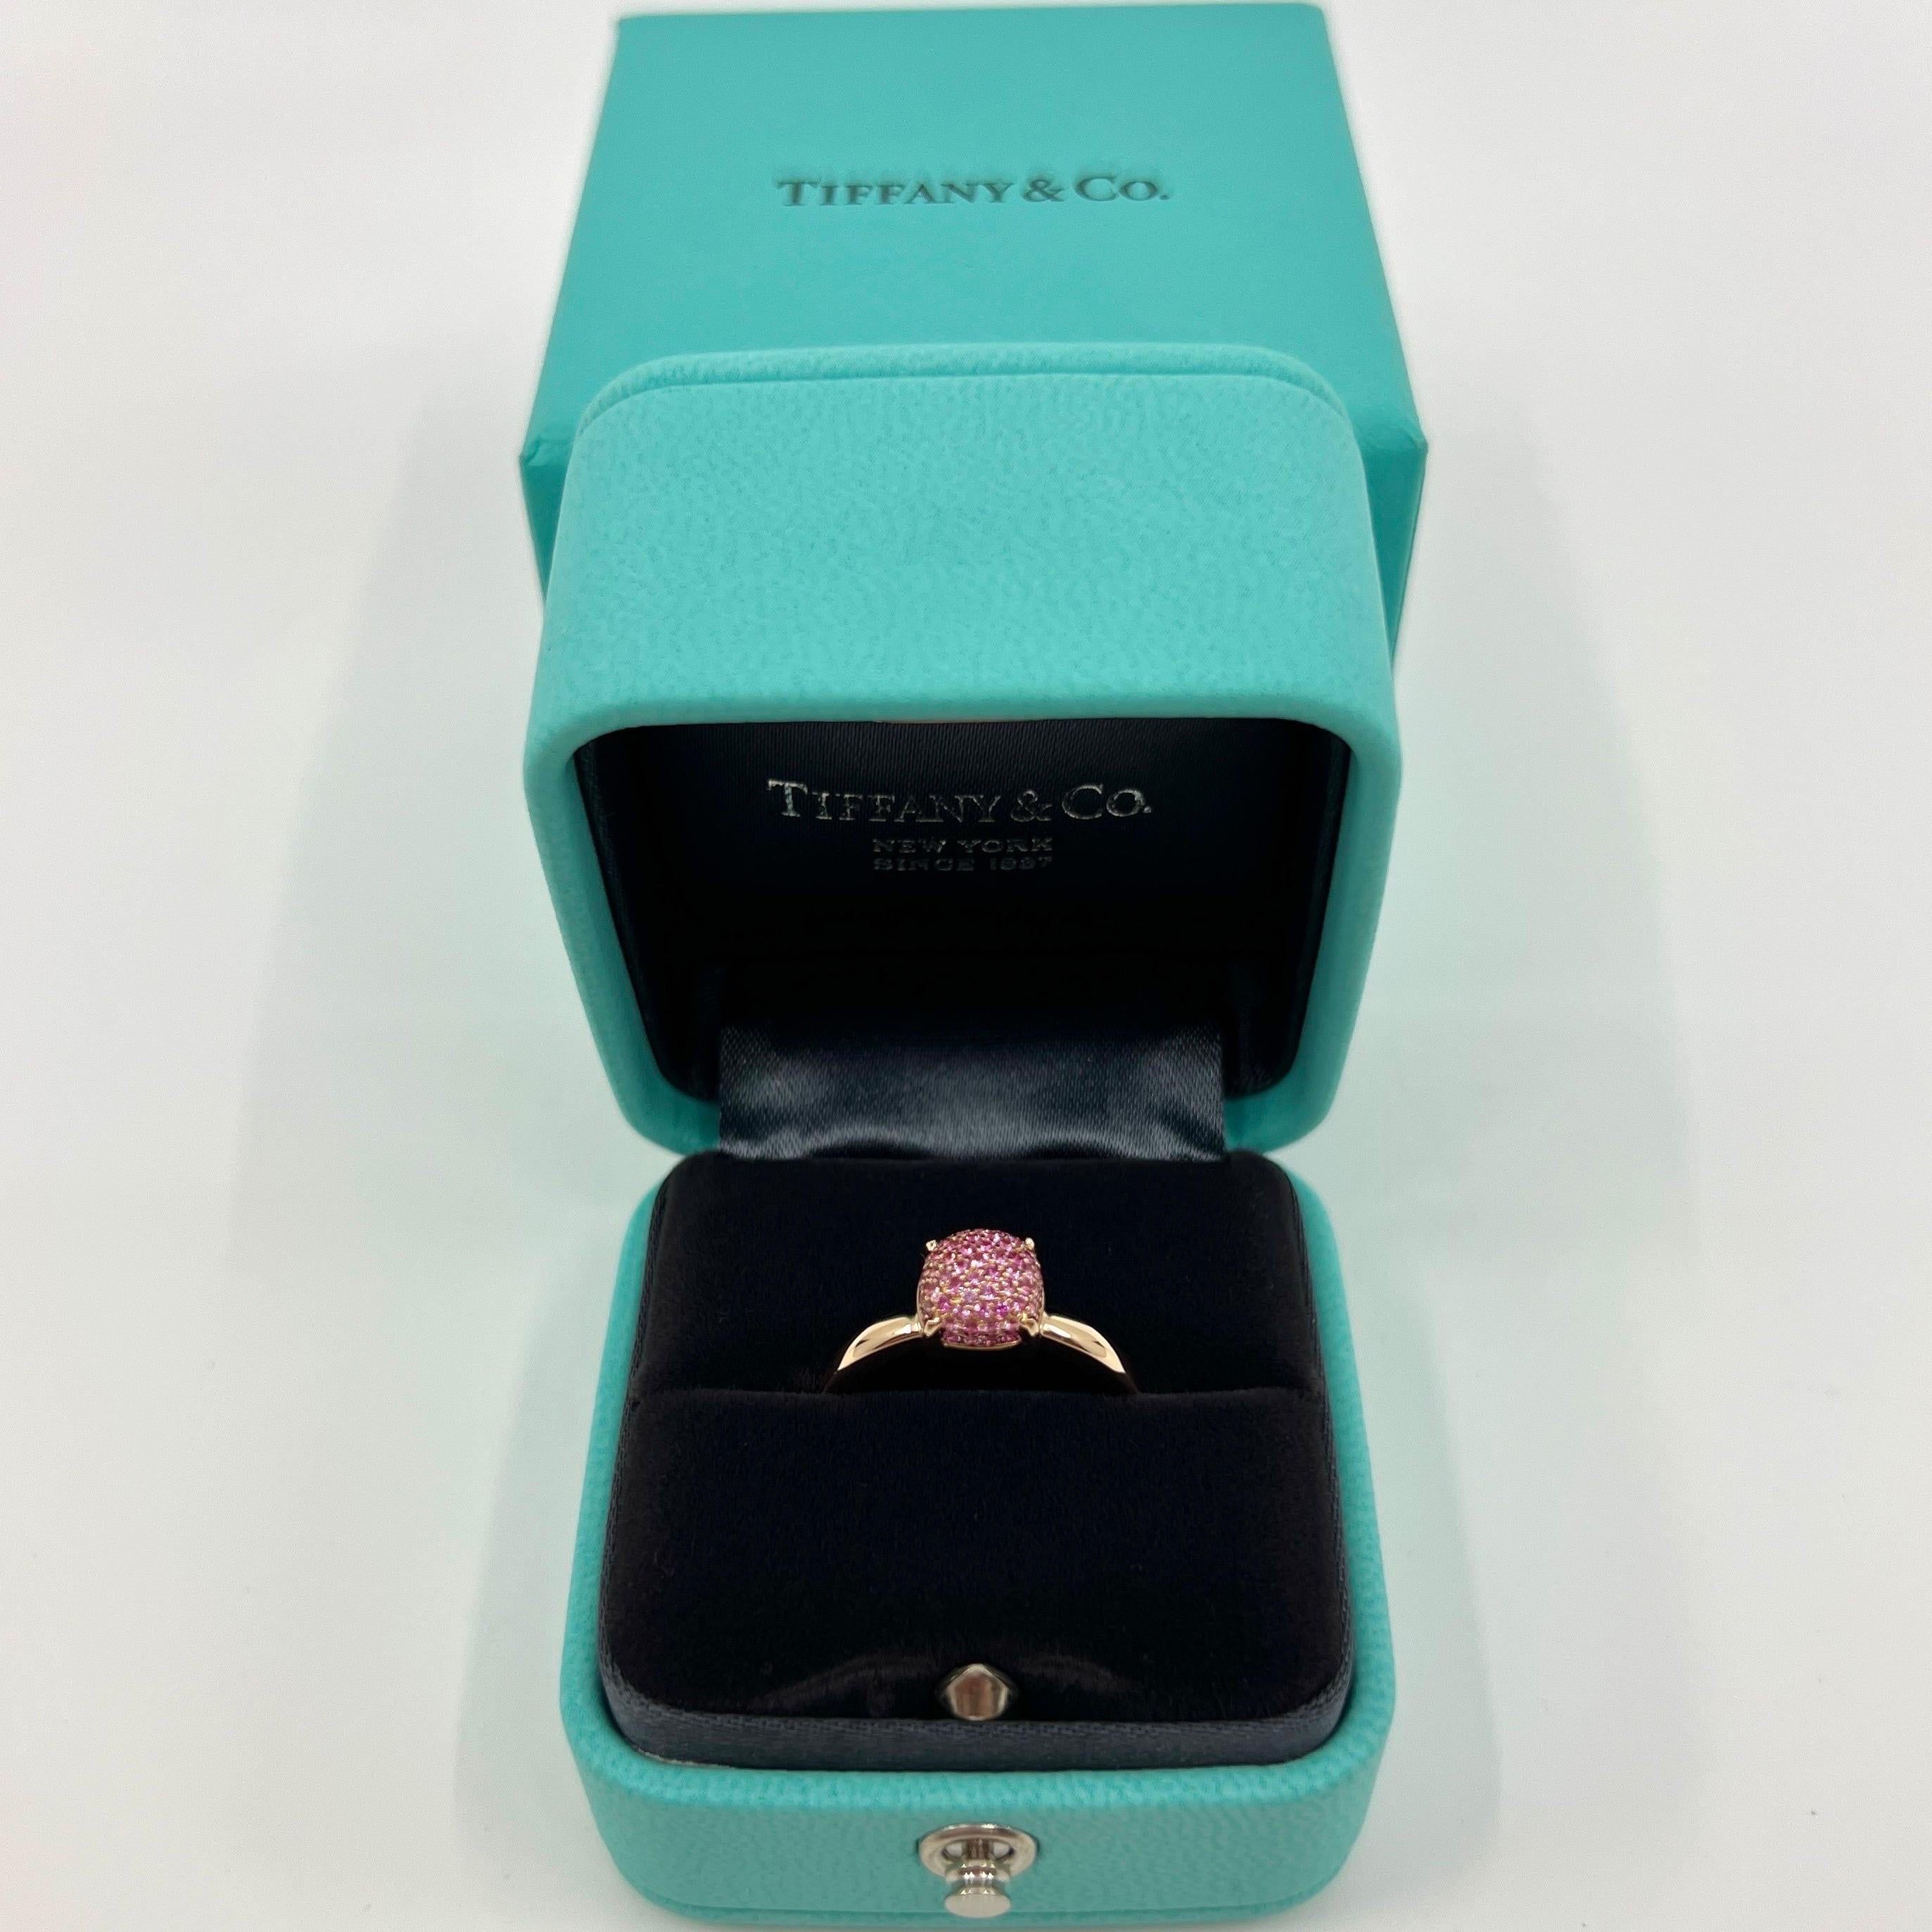 Vintage Tiffany & Co. Paloma Picasso Pavé Pink Sapphire Sugar Stack 18k Rose Gold Ring.

A beautiful and rare pavé round cut pink sapphire ring from the Tiffany & Co. Paloma Picasso collection.

Fine jewellery houses like Tiffany only use the finest